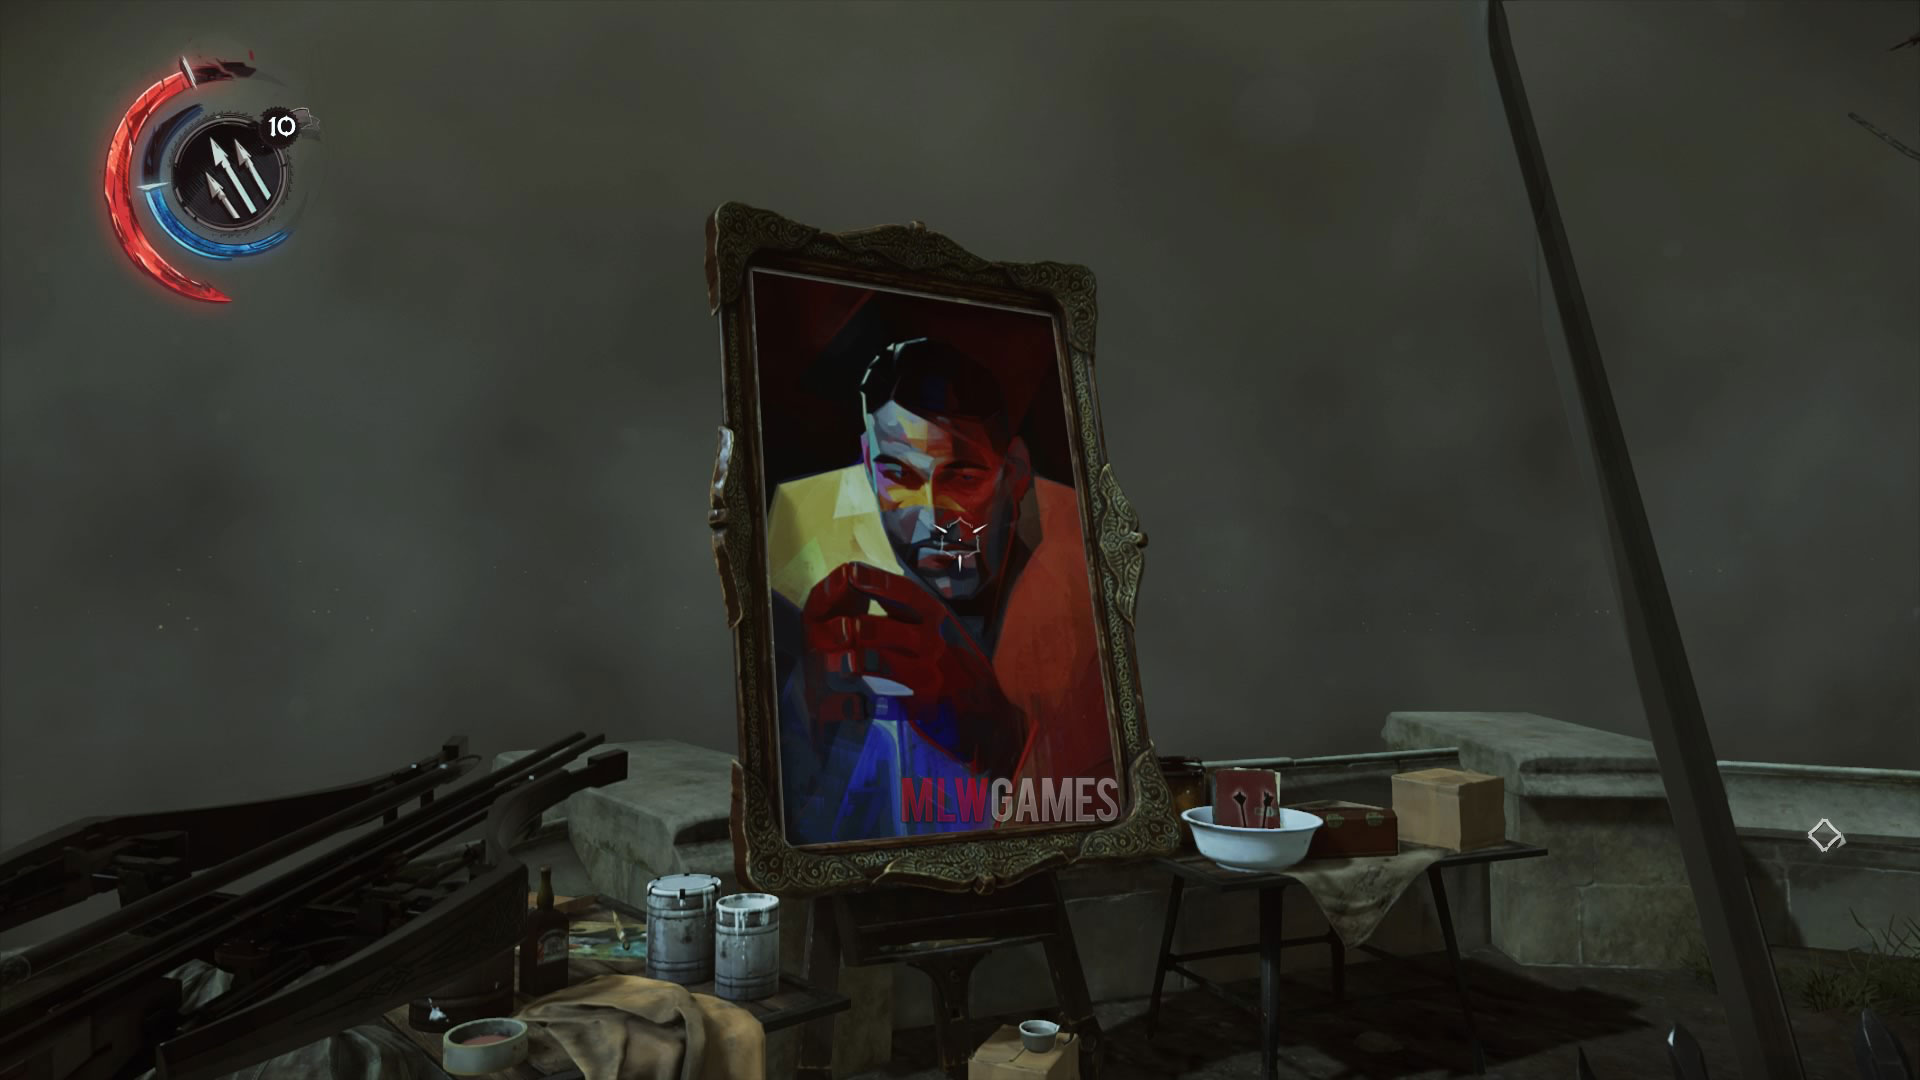 Dishonored M09: Death to the Empress - Dunwall Streets, Dunwall Tower